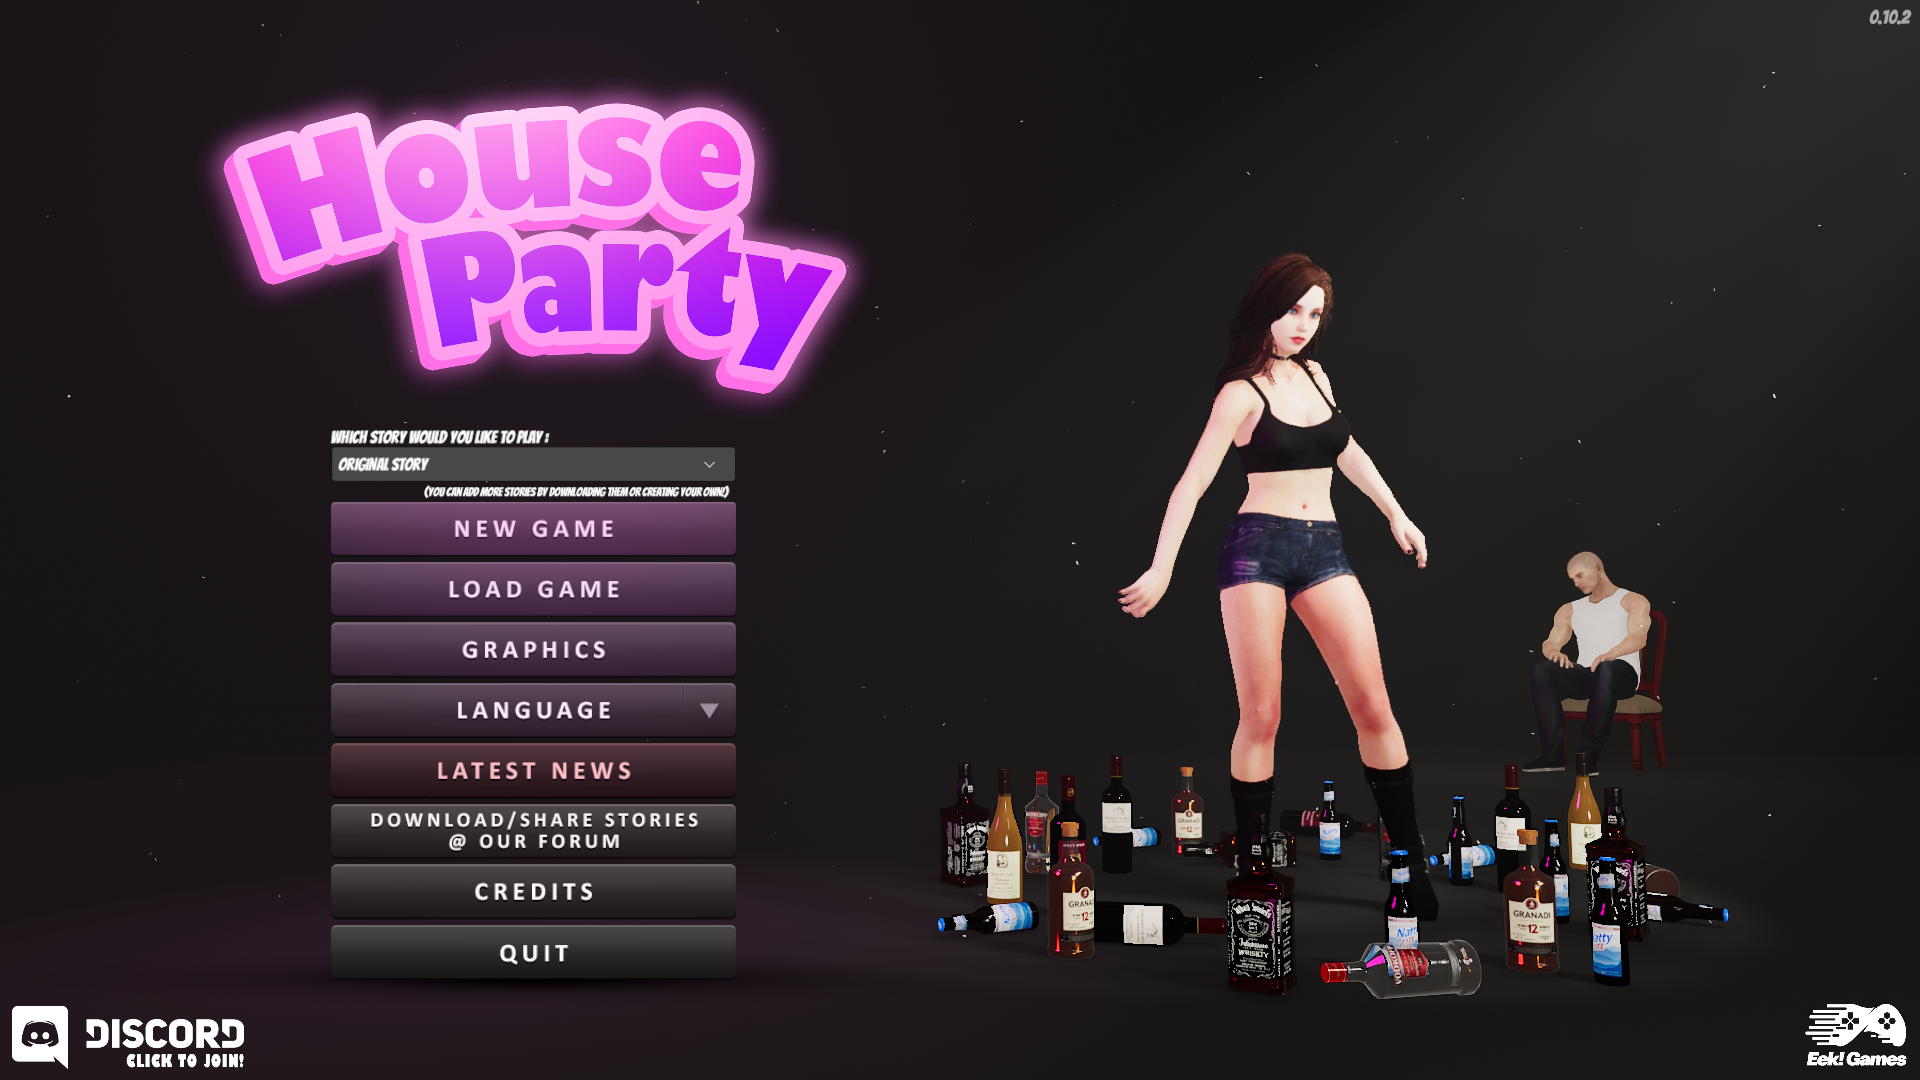 Sex Party Free Download - Adultgamesworld: Free Porn Games & Sex Games Â» House Party â€“ New Final  Version 1.1.6.1 (Full Game) [Eek! Games]